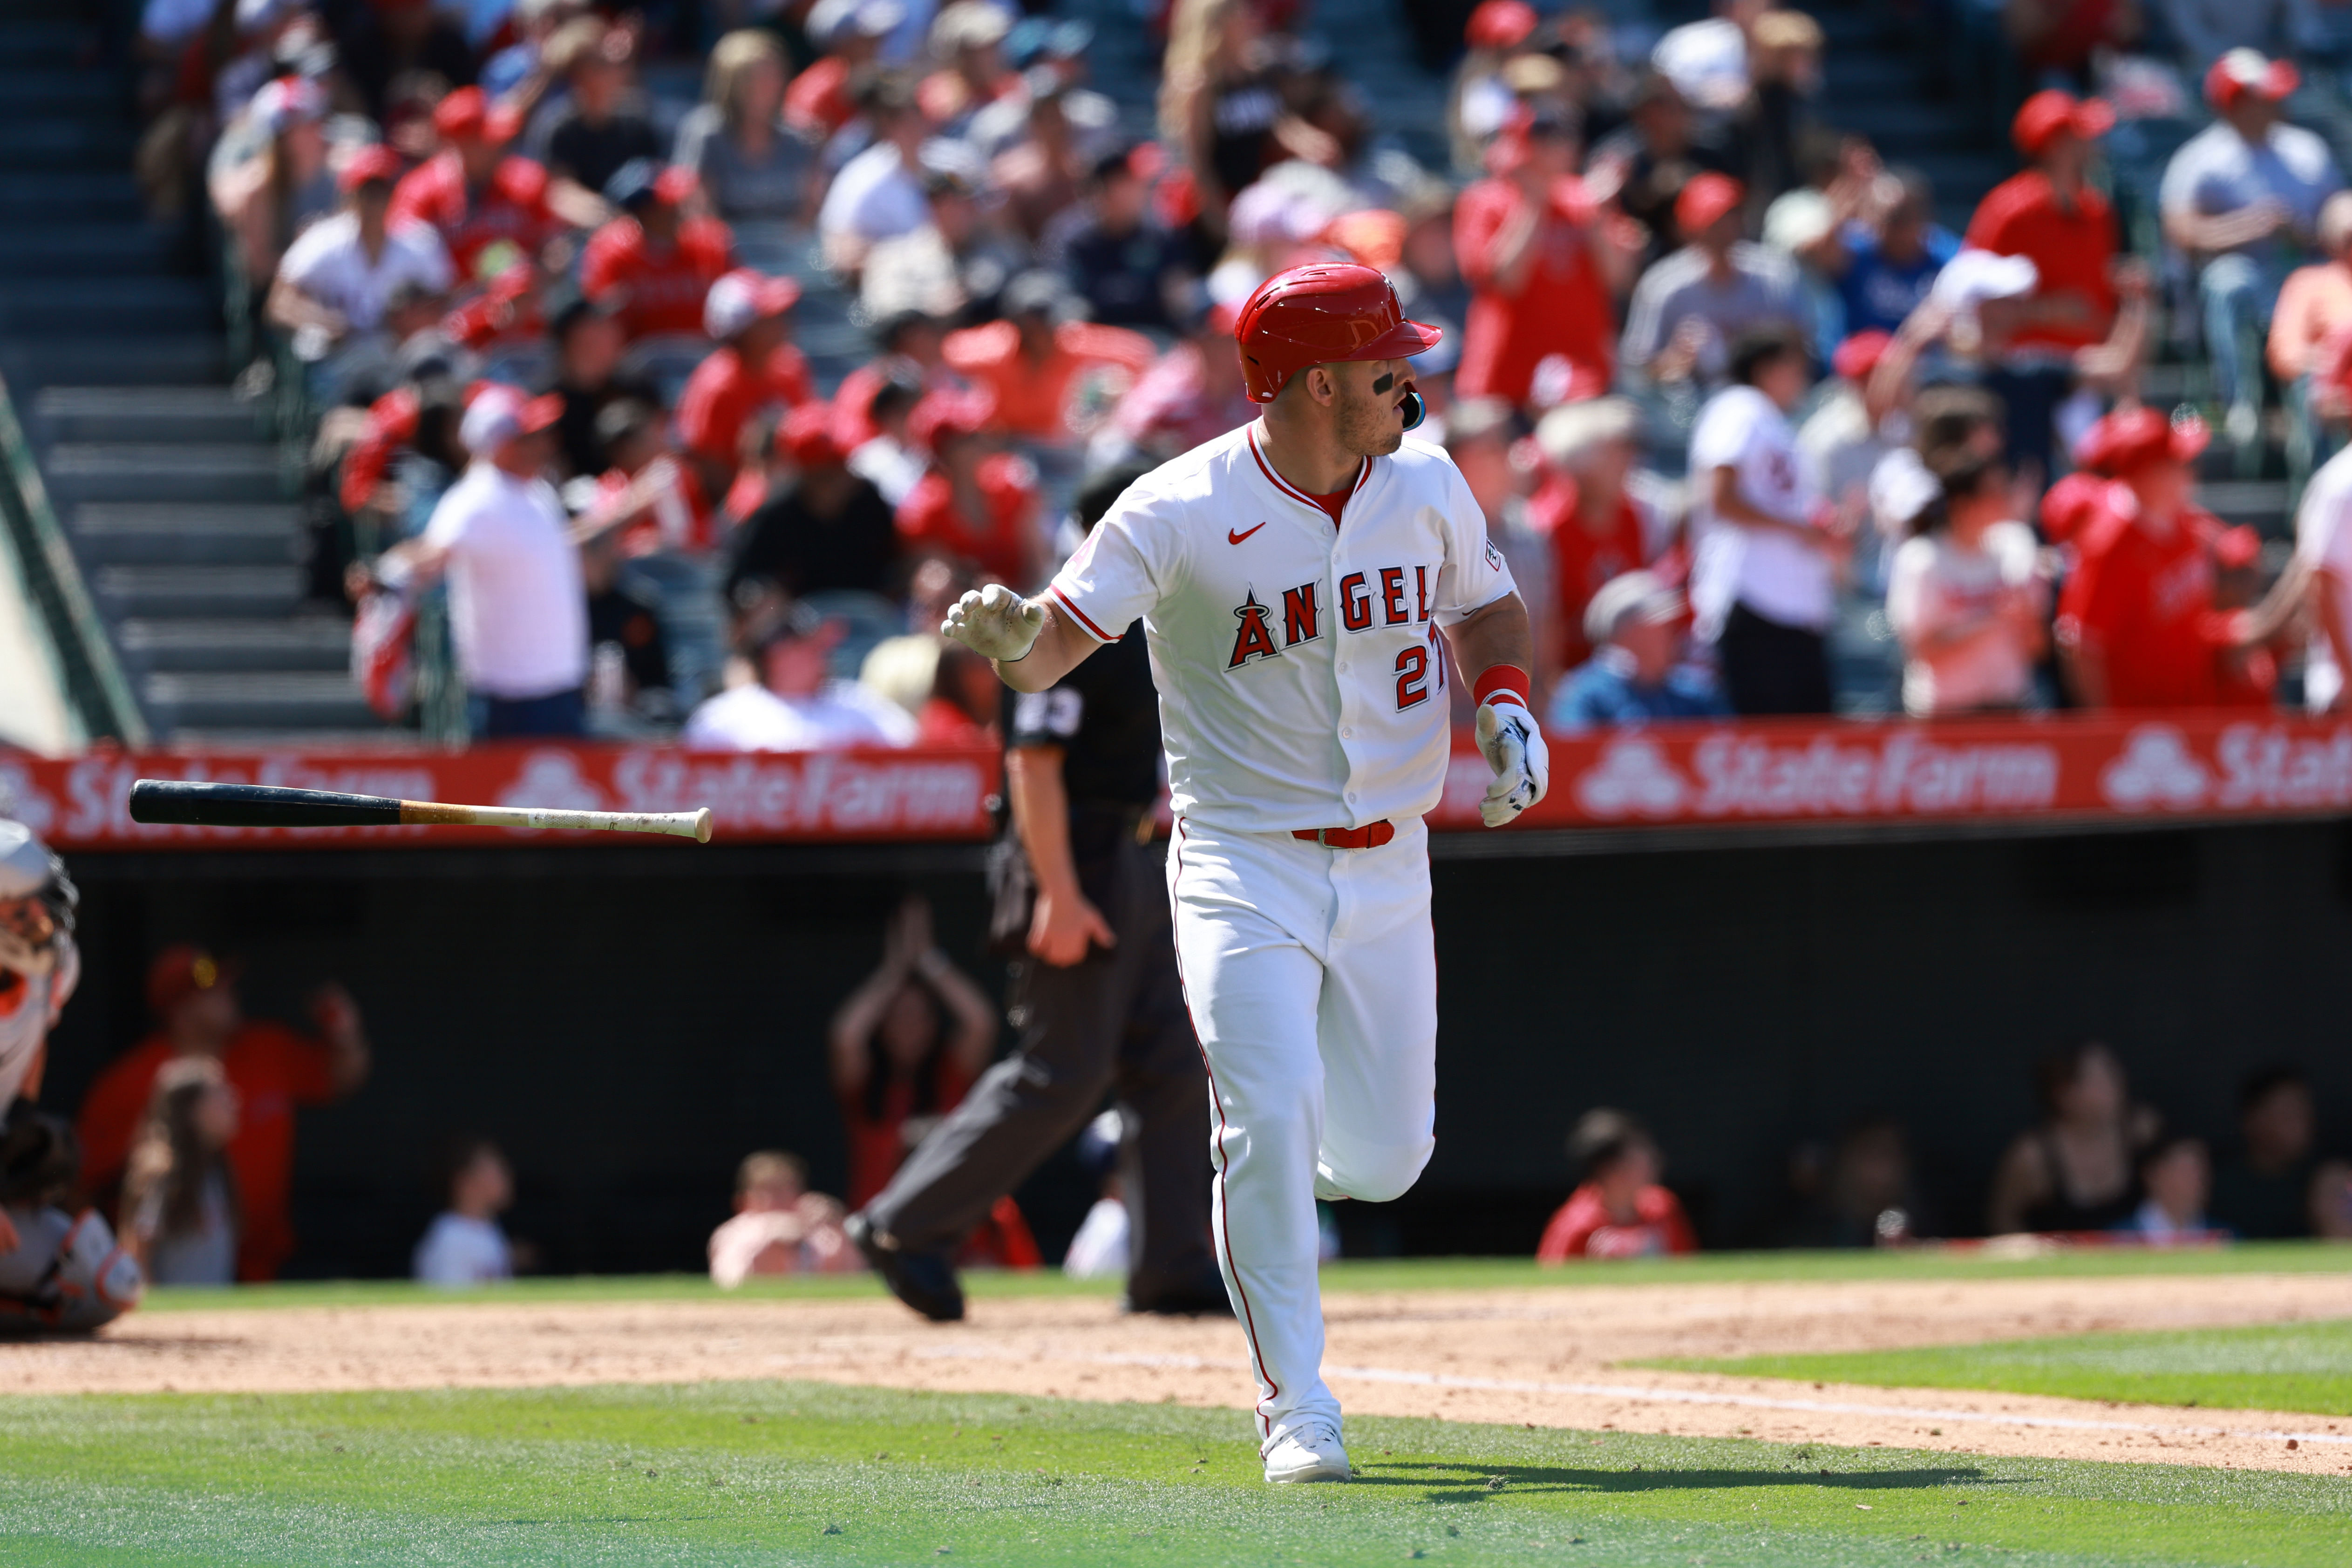 Mike Trout hit his 10th home run last night